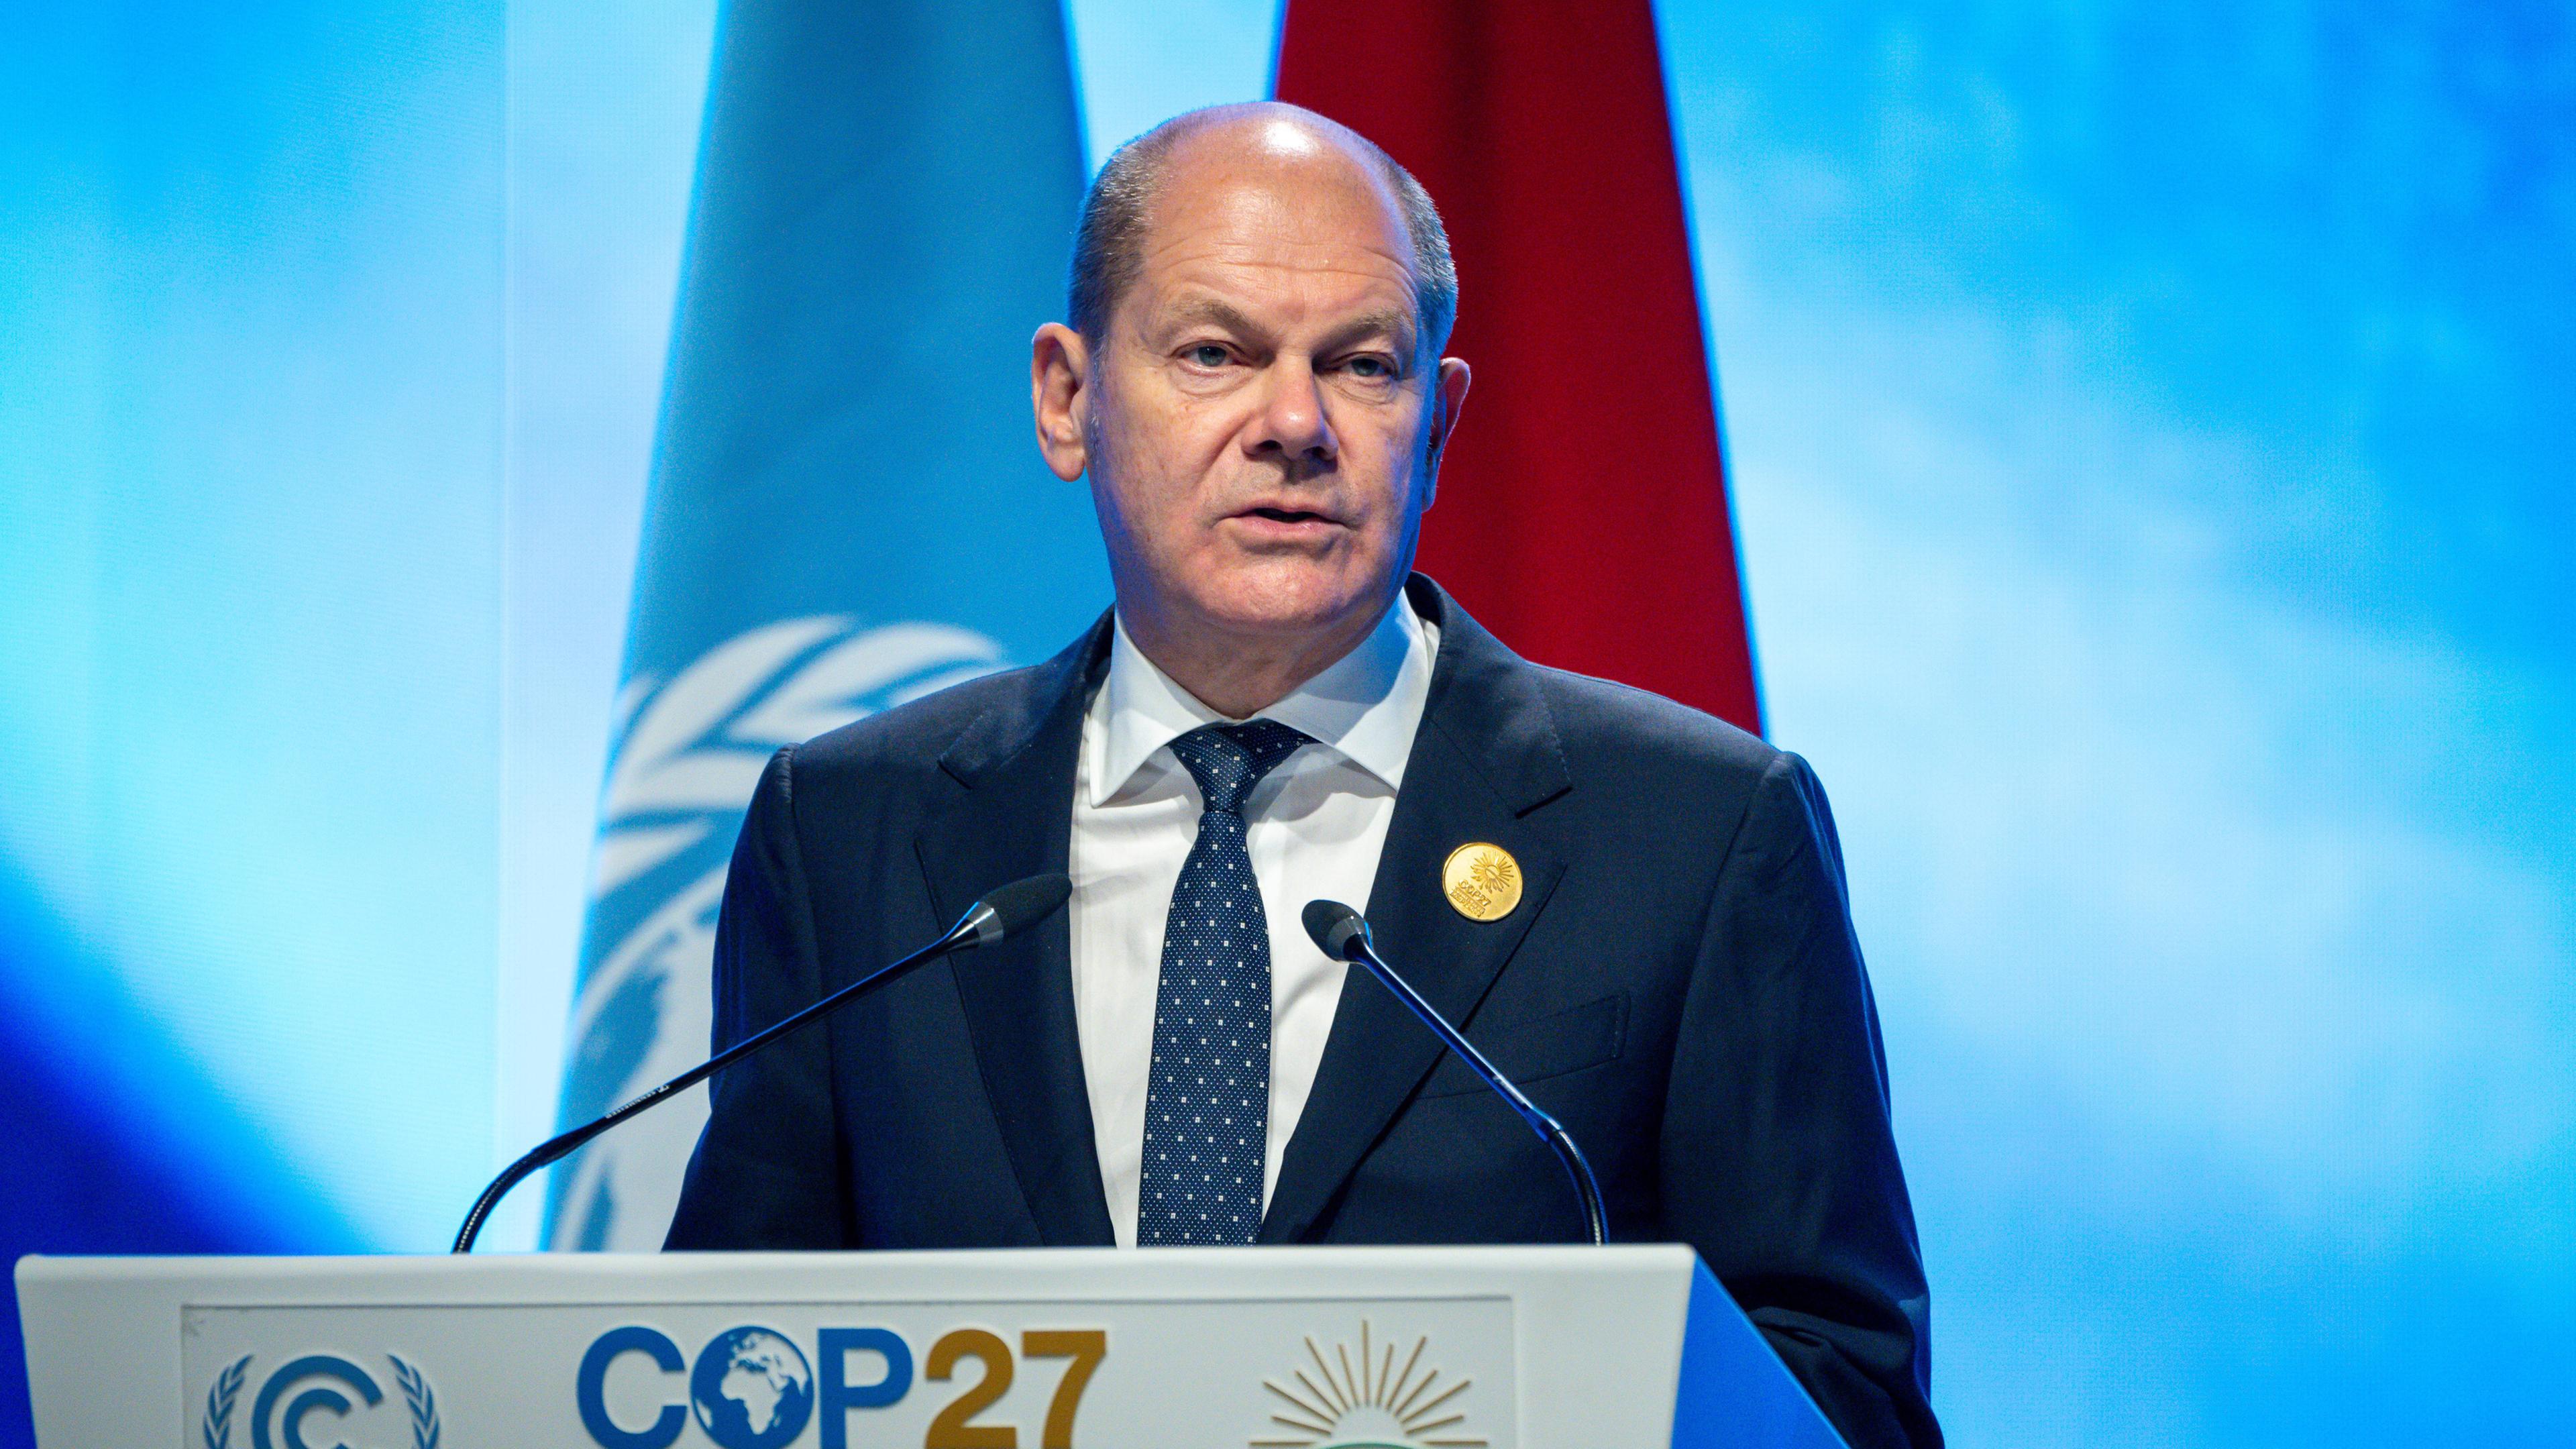 Chancellor Olaf Scholz speaks at the COP27 world climate conference in Egypt